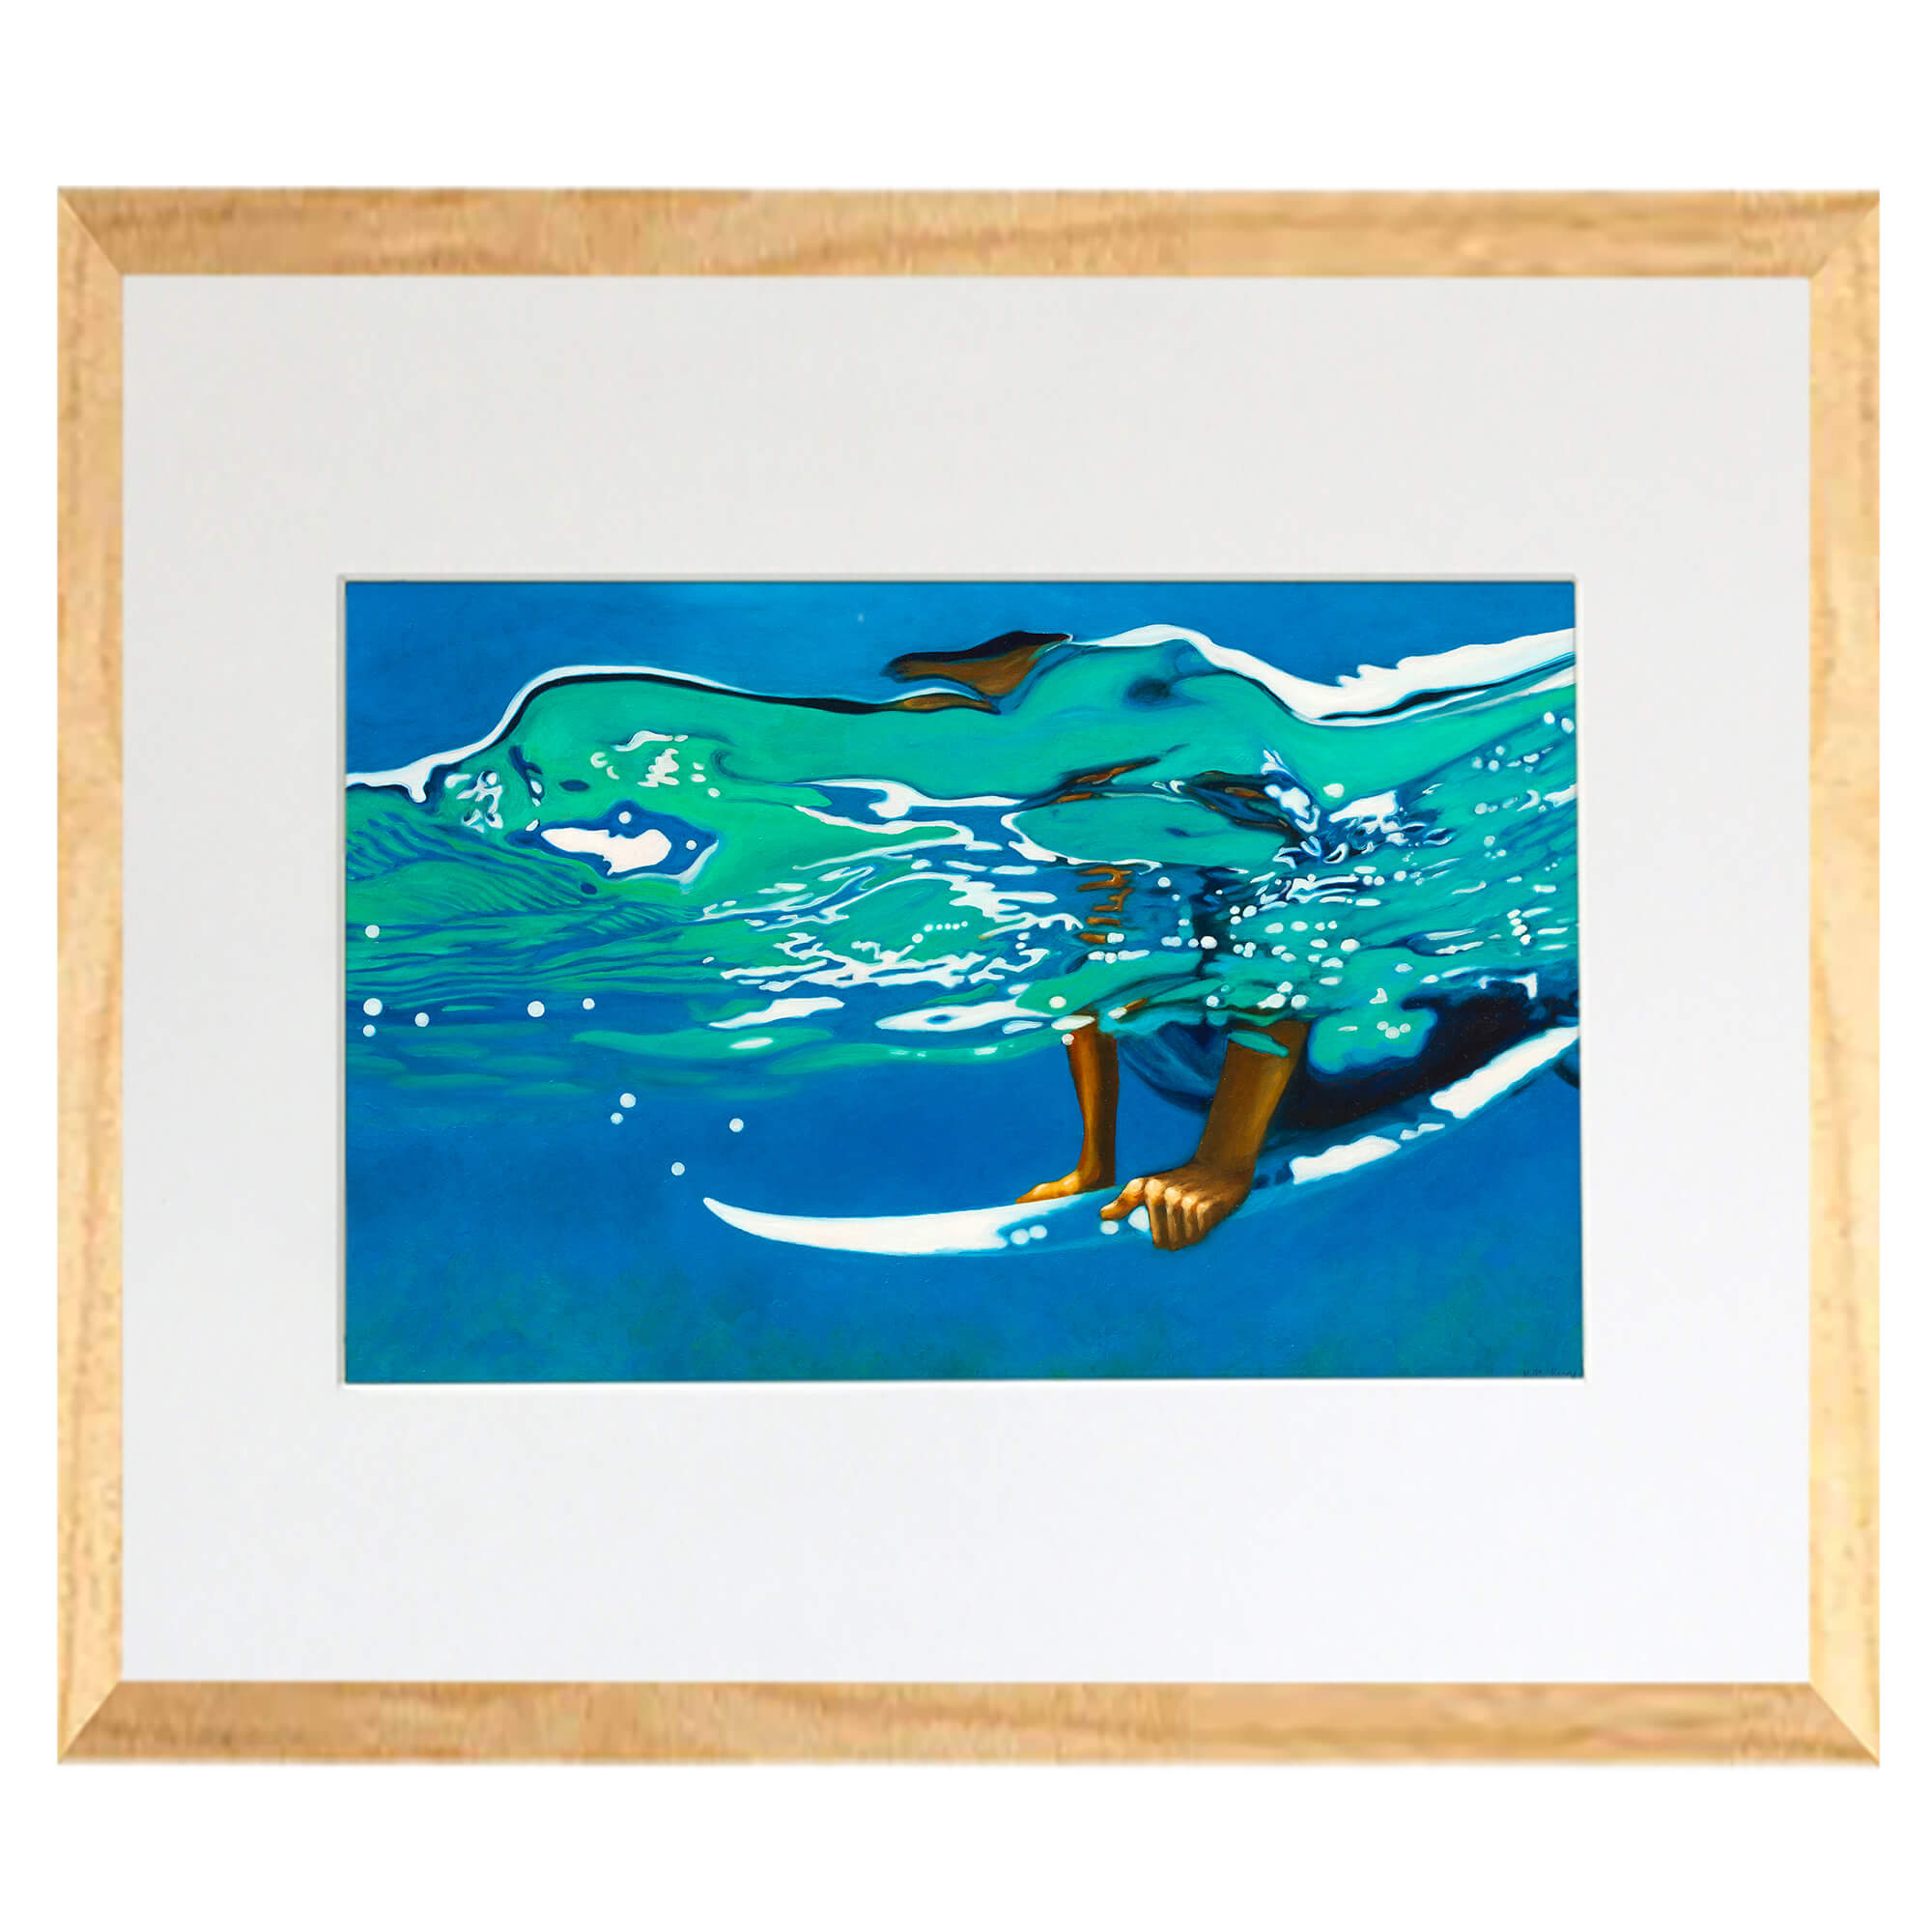 Matted art print with wood frame featuring a man surfing in the deep water  by hawaii artist Kelly Keane